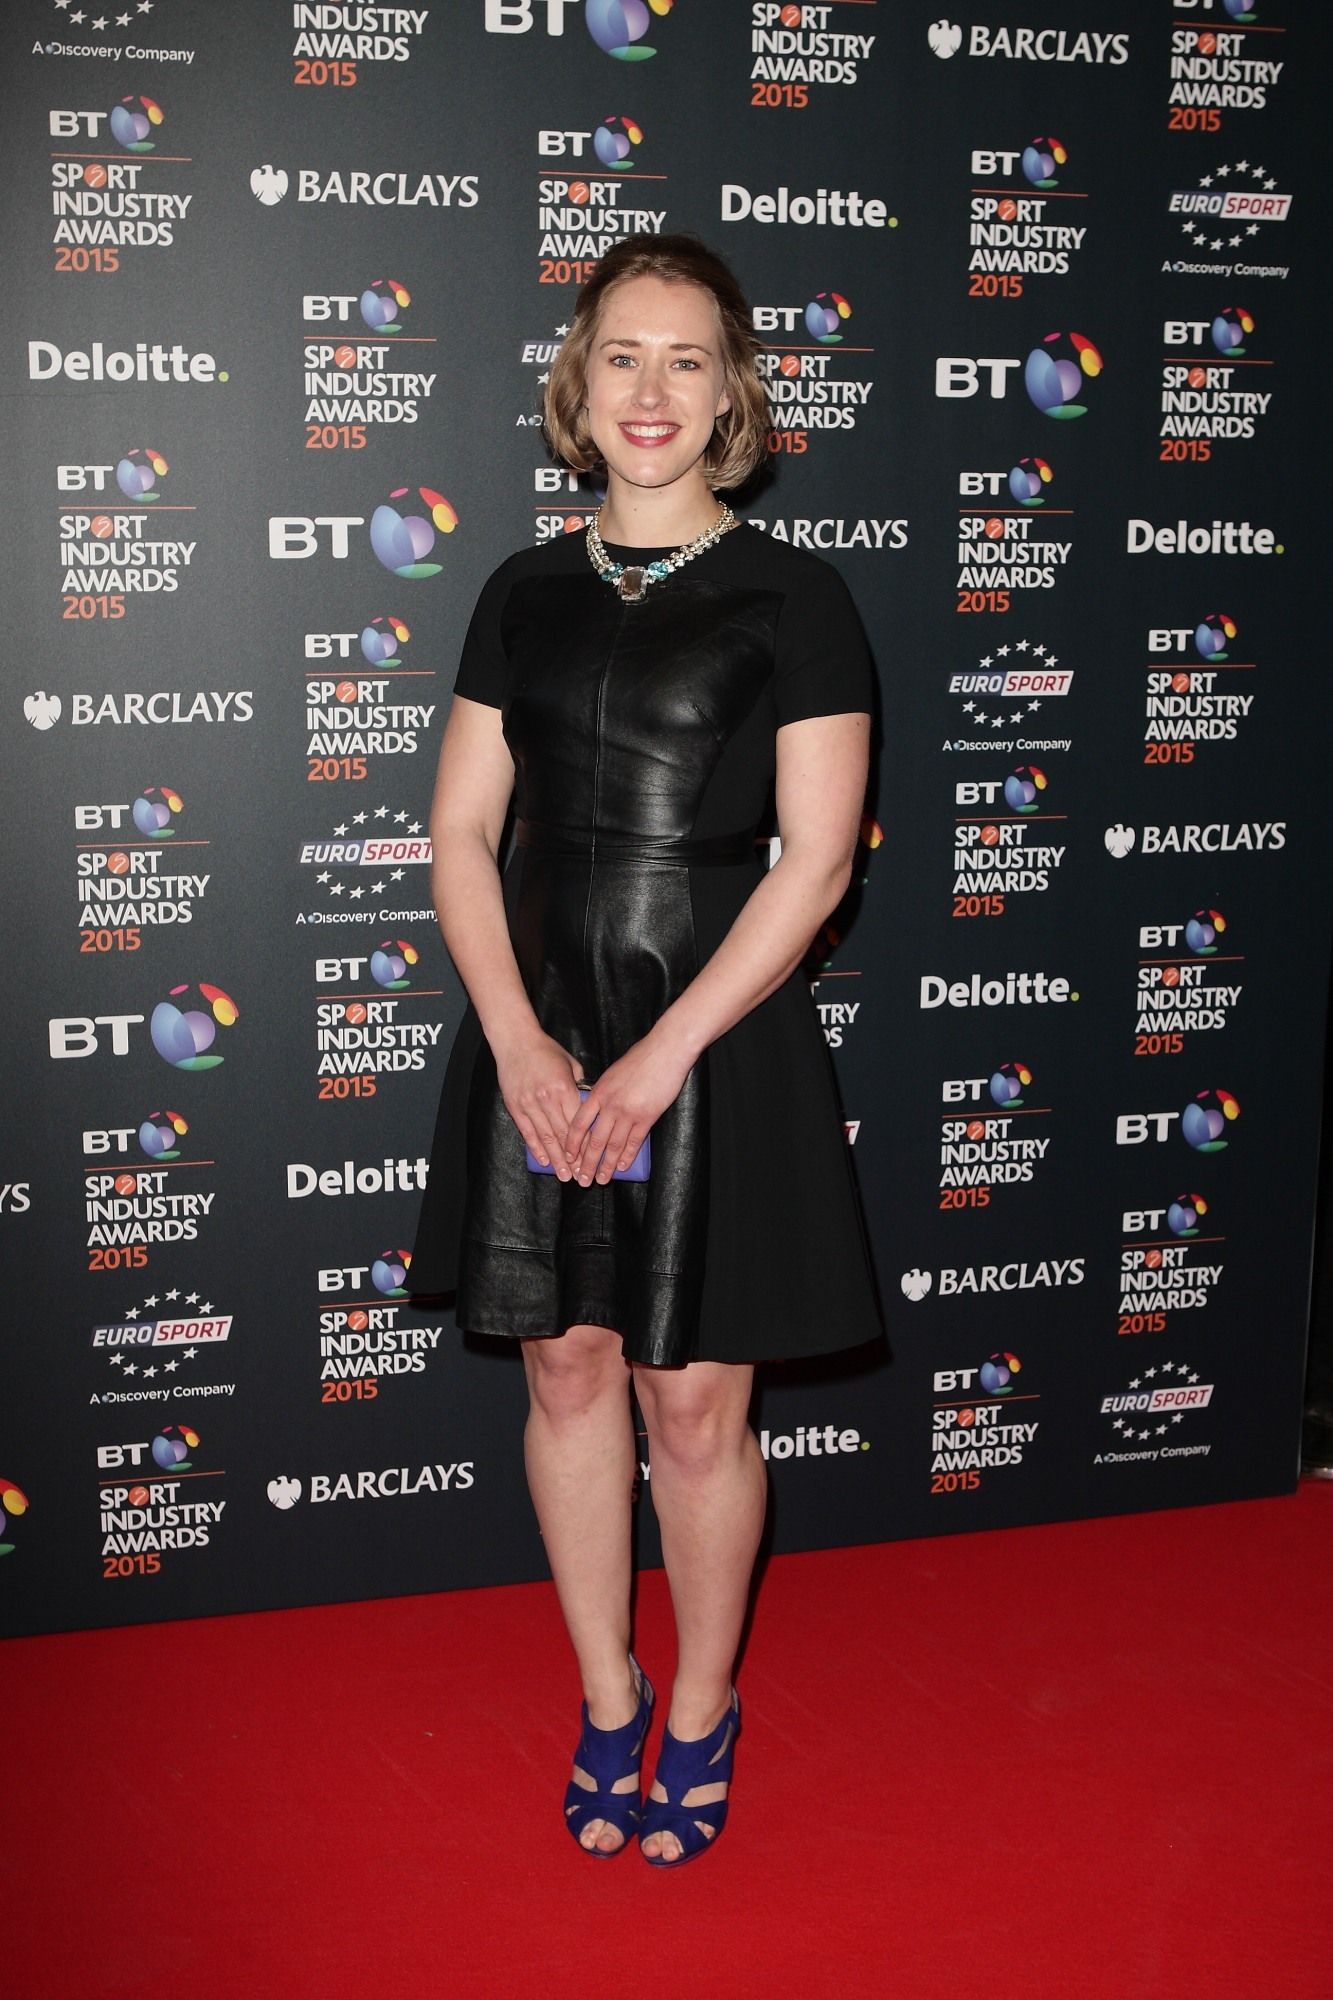 Lizzy Yarnold attends BT Sport Industry Awards